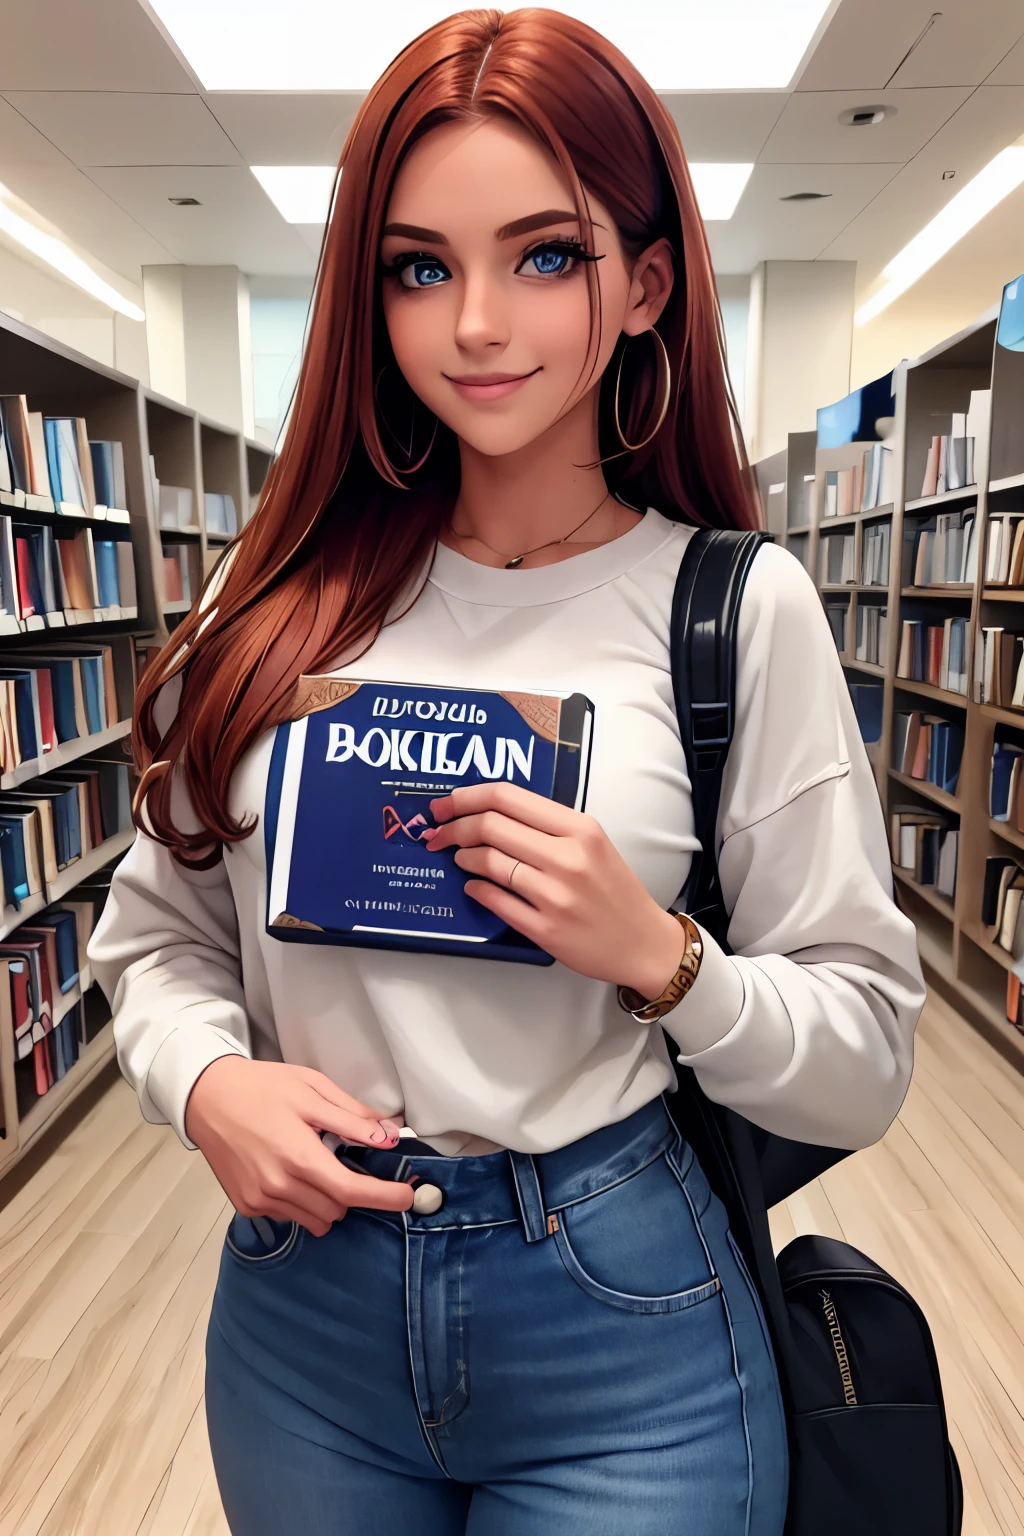 Caucasian woman, 20 years old, hair with red highlights,blue eyes, makeup, big eyeliner, painted nails, friendly and kind smile, background, library, holds book in hand, blue sweatshirt, bracelet, backpack on back, used jeans ​, school tennis, calm body expression, different poses, detalhe nos olhos, olhos realistas, rosto detalhado bem feito
